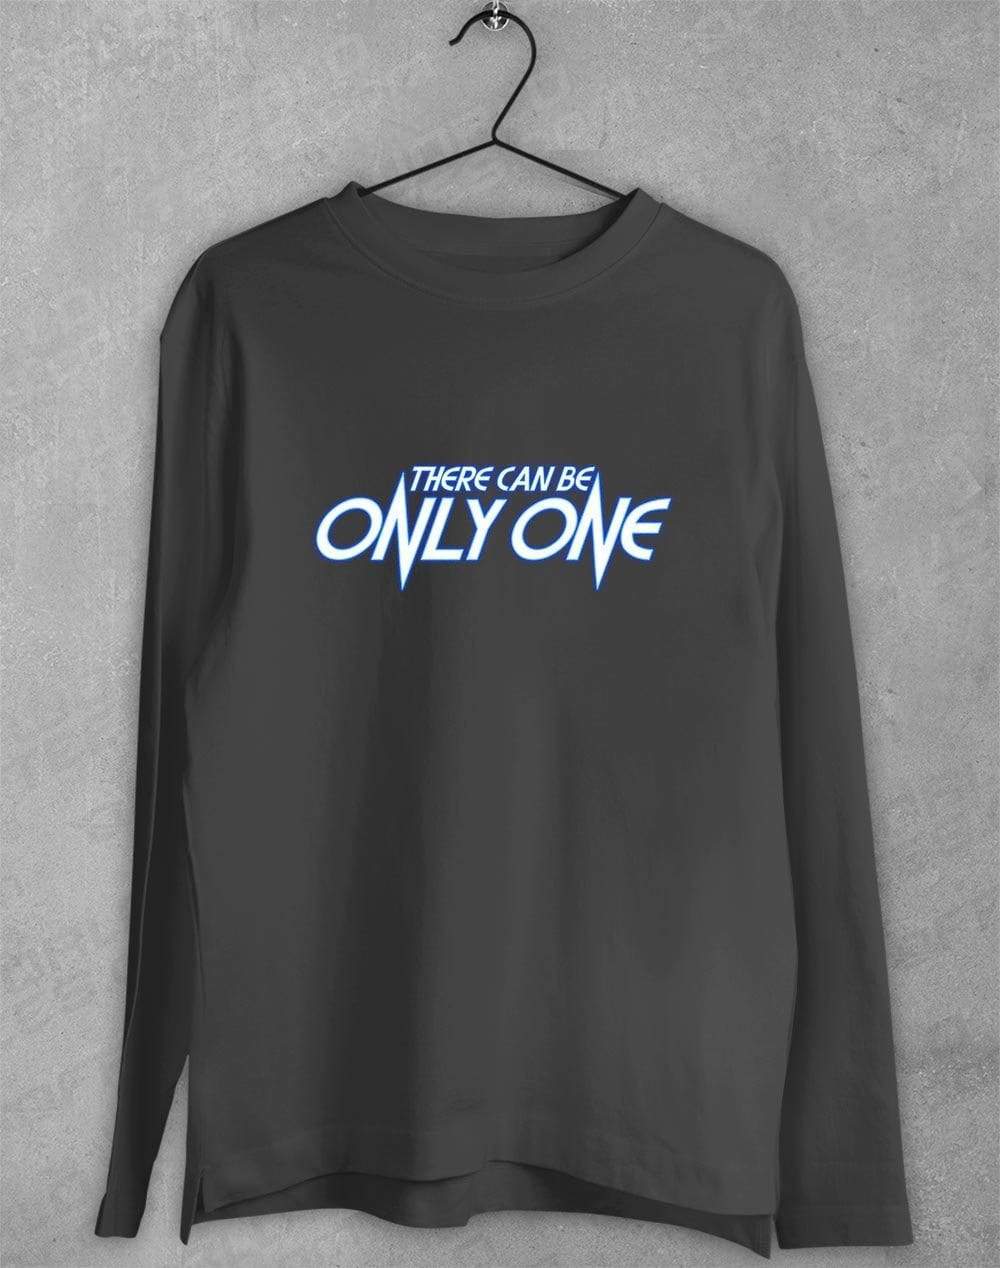 There Can Be Only One Long Sleeve T-Shirt S / Charcoal  - Off World Tees